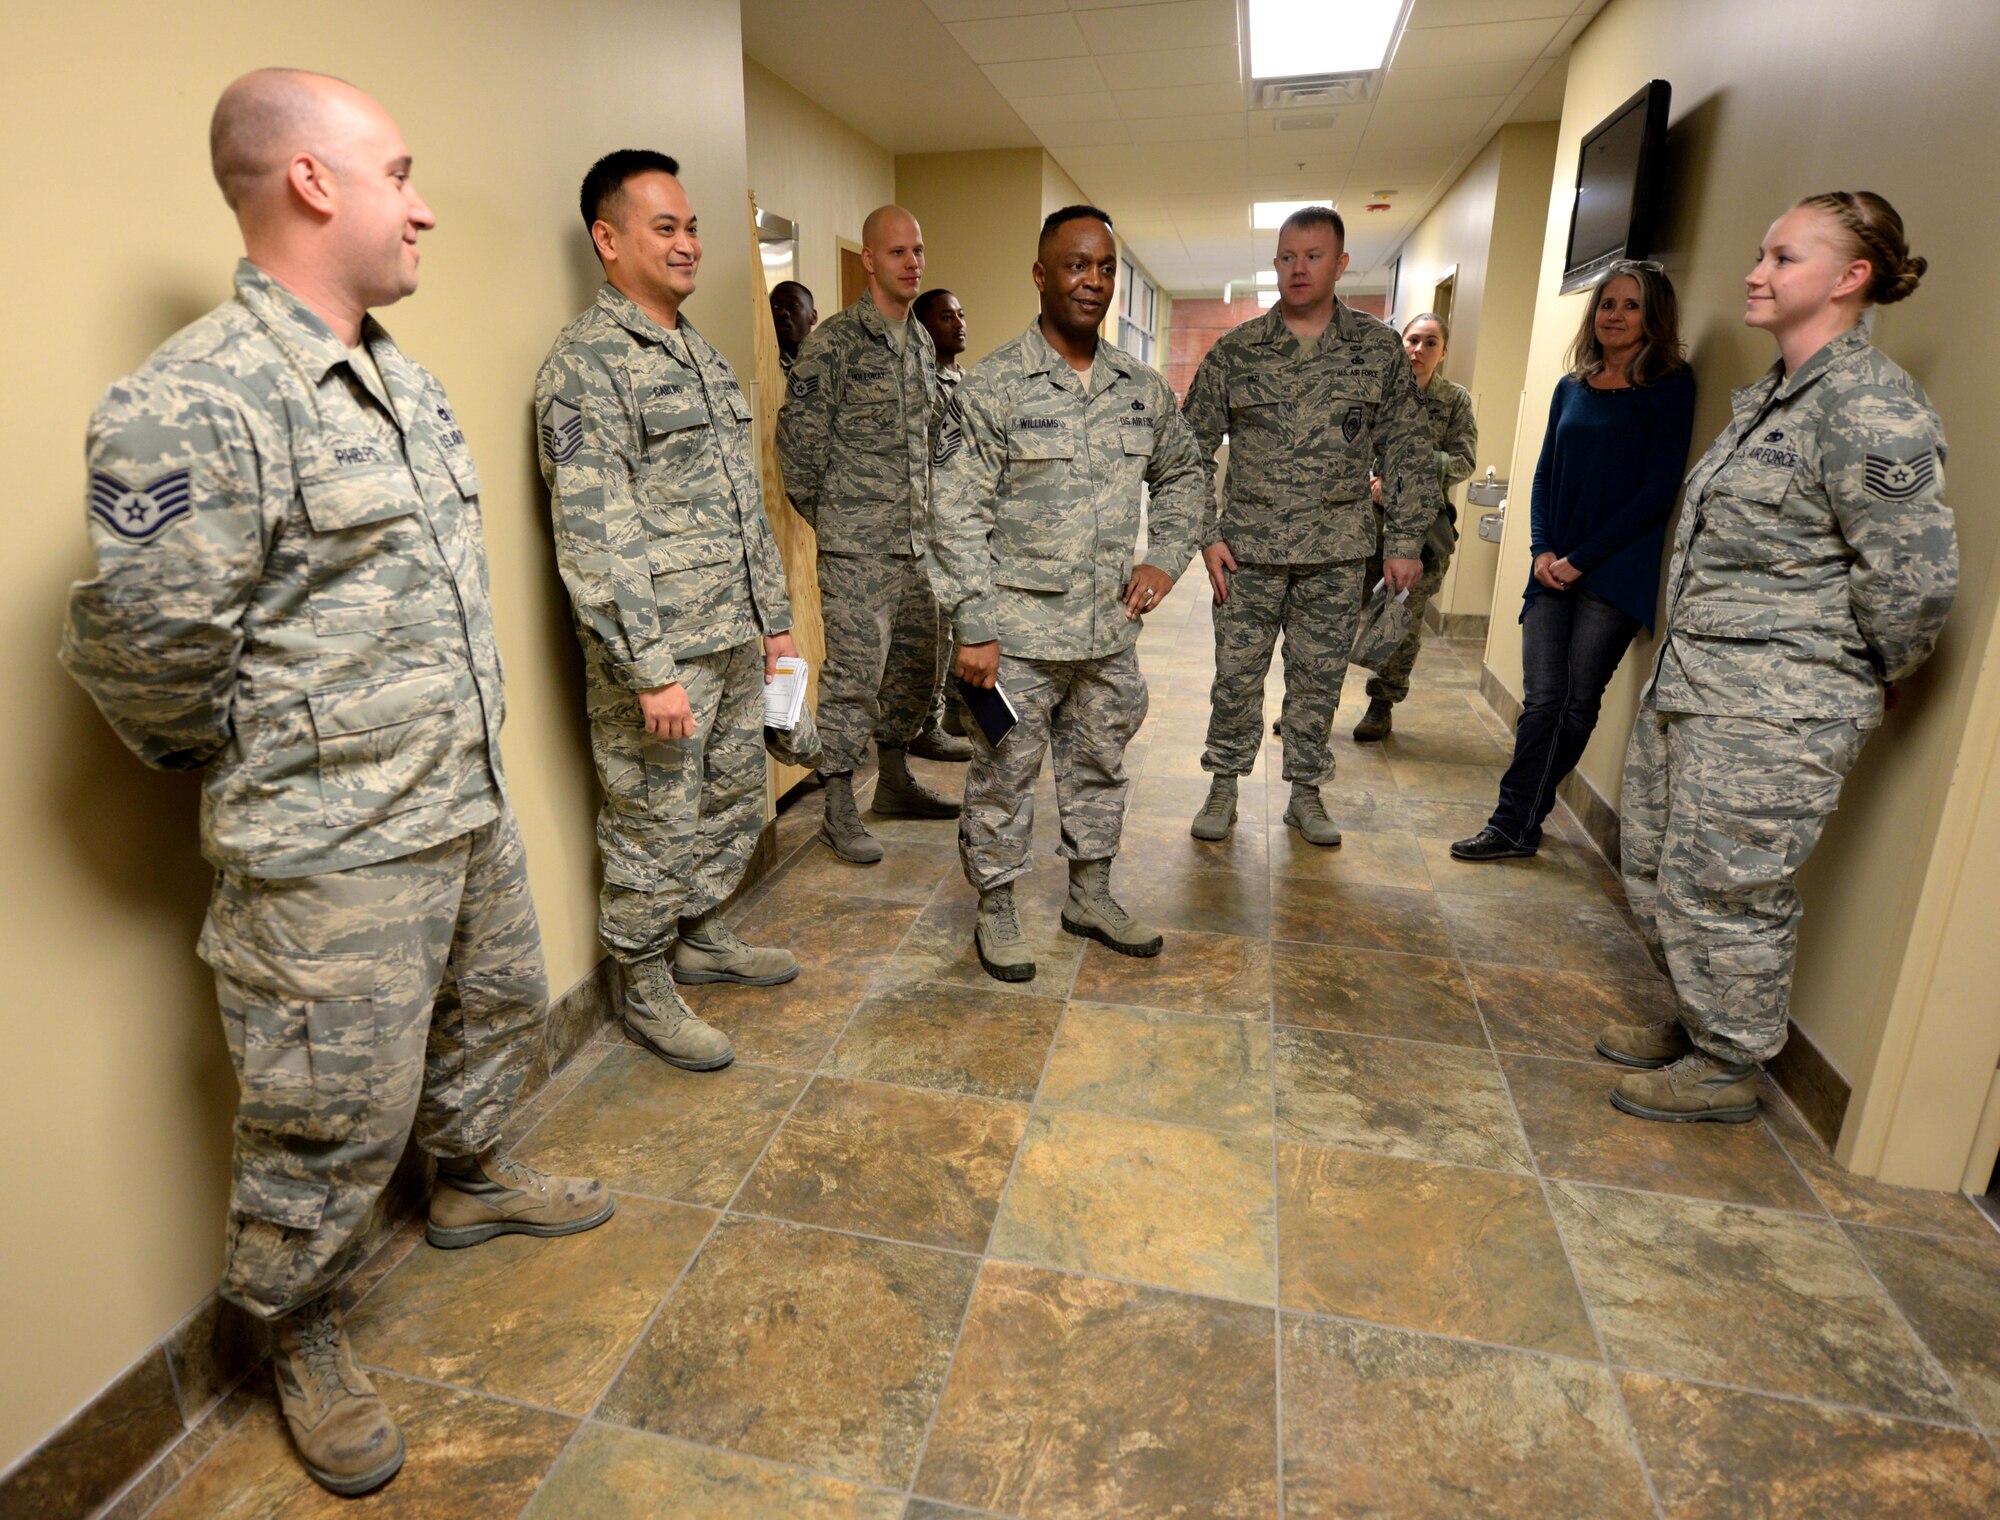 Chief Master Sgt. Calvin Williams, Air Force Global Strike Command command chief, center, meets with Airmen assigned to the 28th Logistics Readiness Squadron during a visit to Ellsworth Air Force Base, S.D., March 2, 2017. The 28th LRS Airmen showed Williams around the base’s deployment center while briefing about the deployment process at Ellsworth. (U.S. Air Force photo by Airman 1st Class Denise M. Jenson)